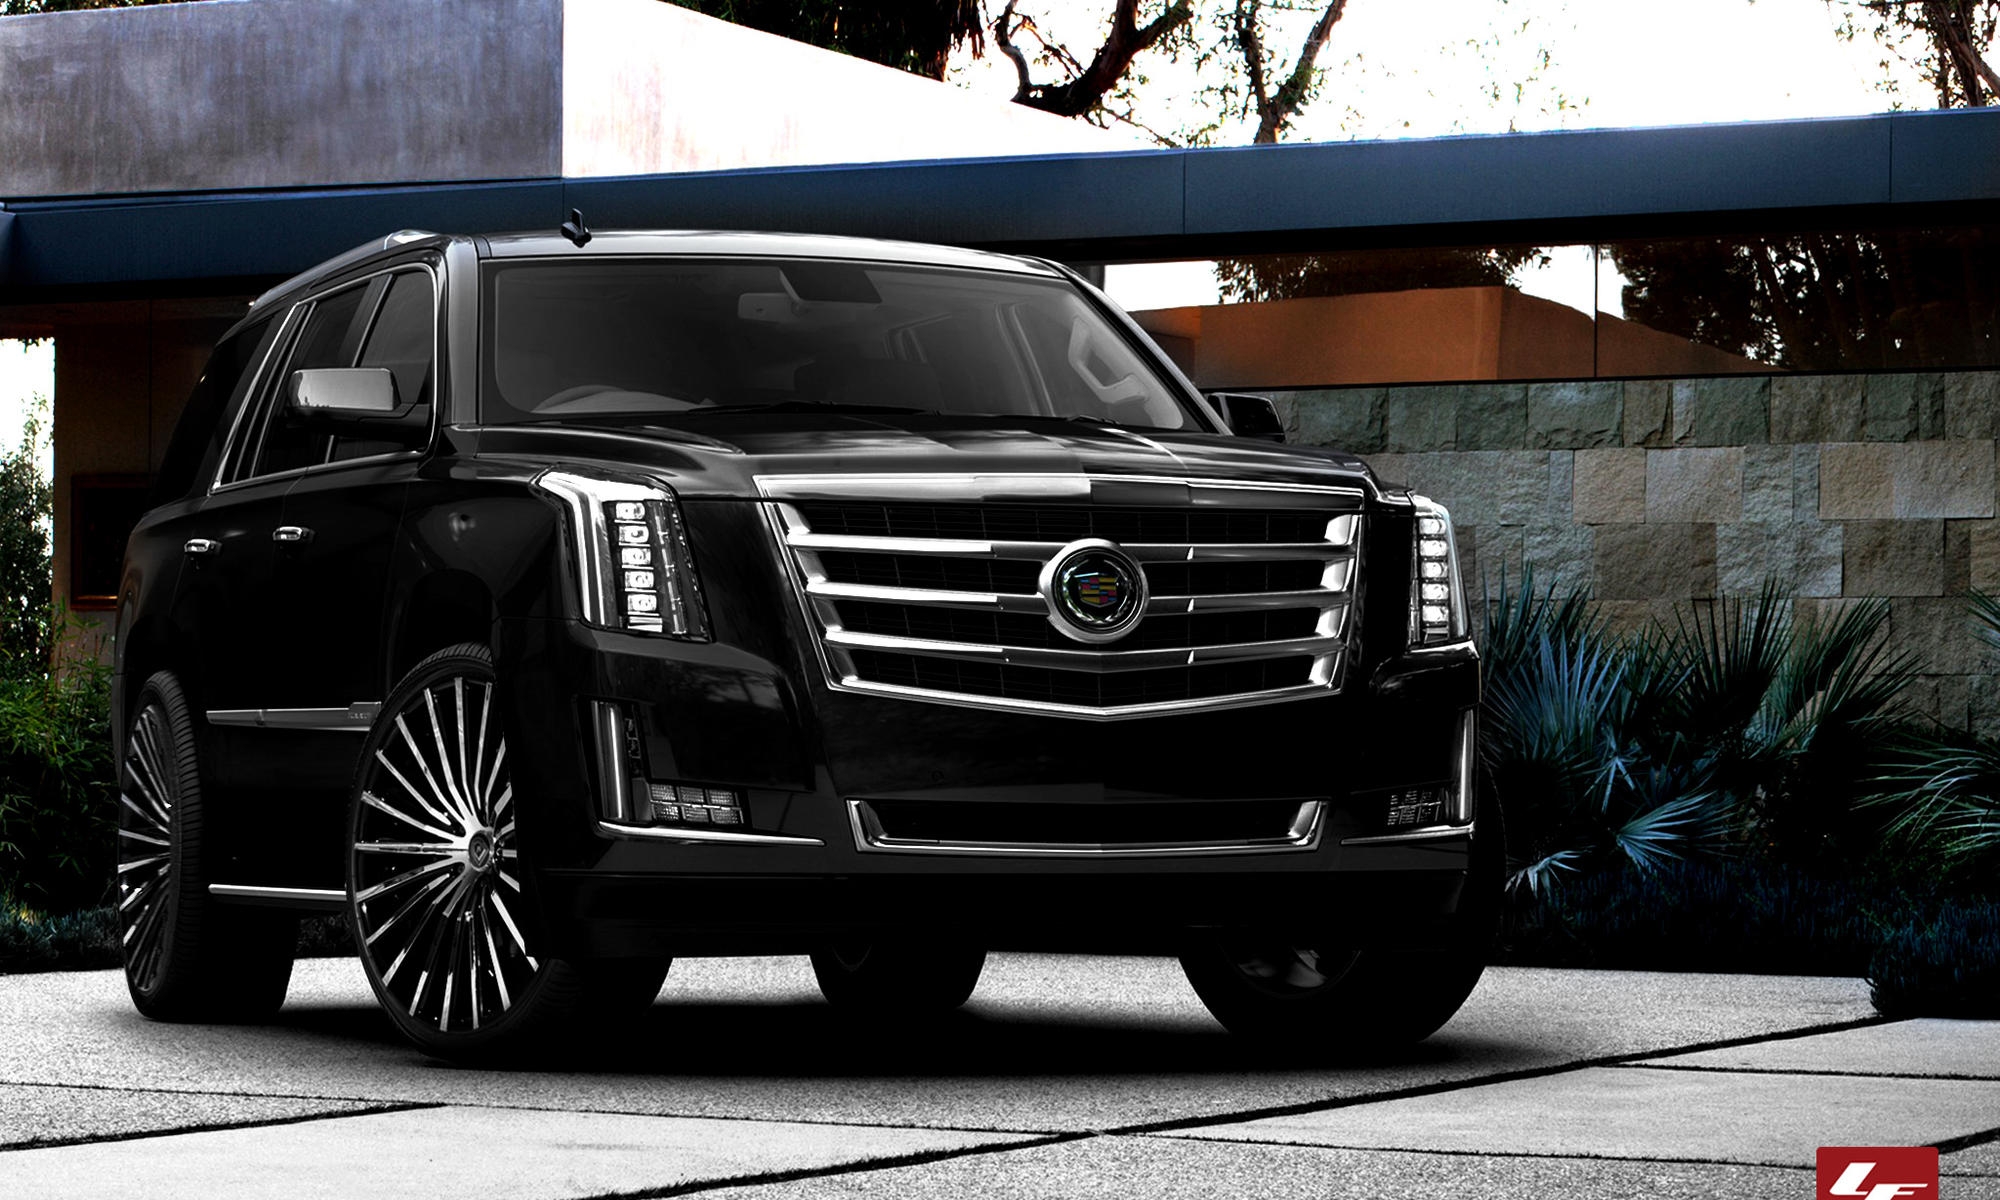 New Cadillac Escalade Models Image And Wallpaper Luxury